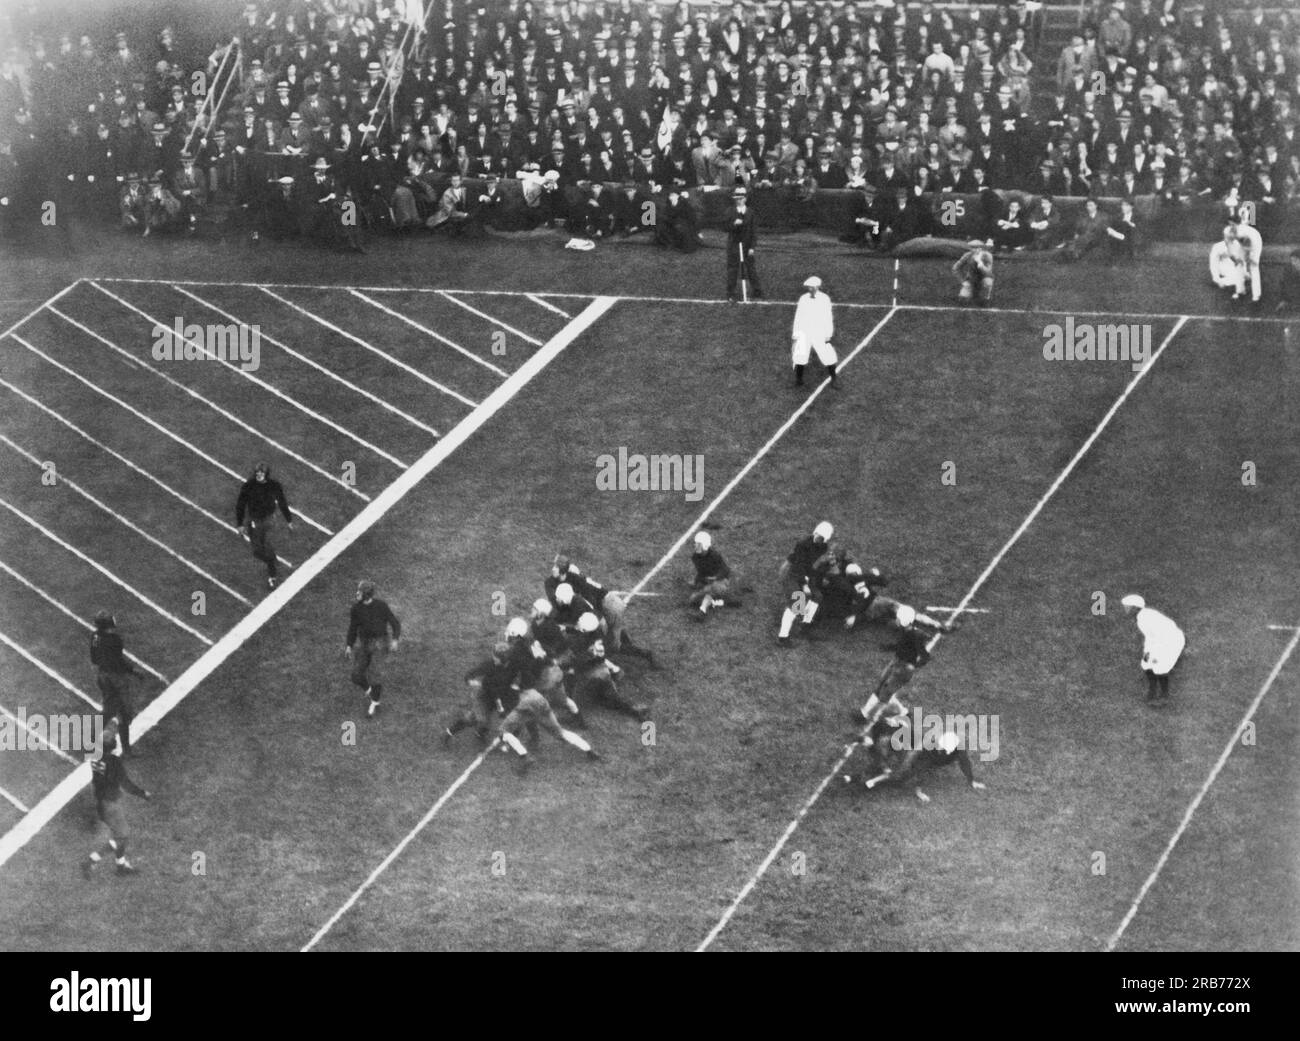 Boston, Massachusetts:  November 21, 1931 Yale halfback Albie Booth ends his college career with a dropkick that beat Harvard 3 to 0 at Soldiers Field in the 50th annual football game between the two schools. Stock Photo